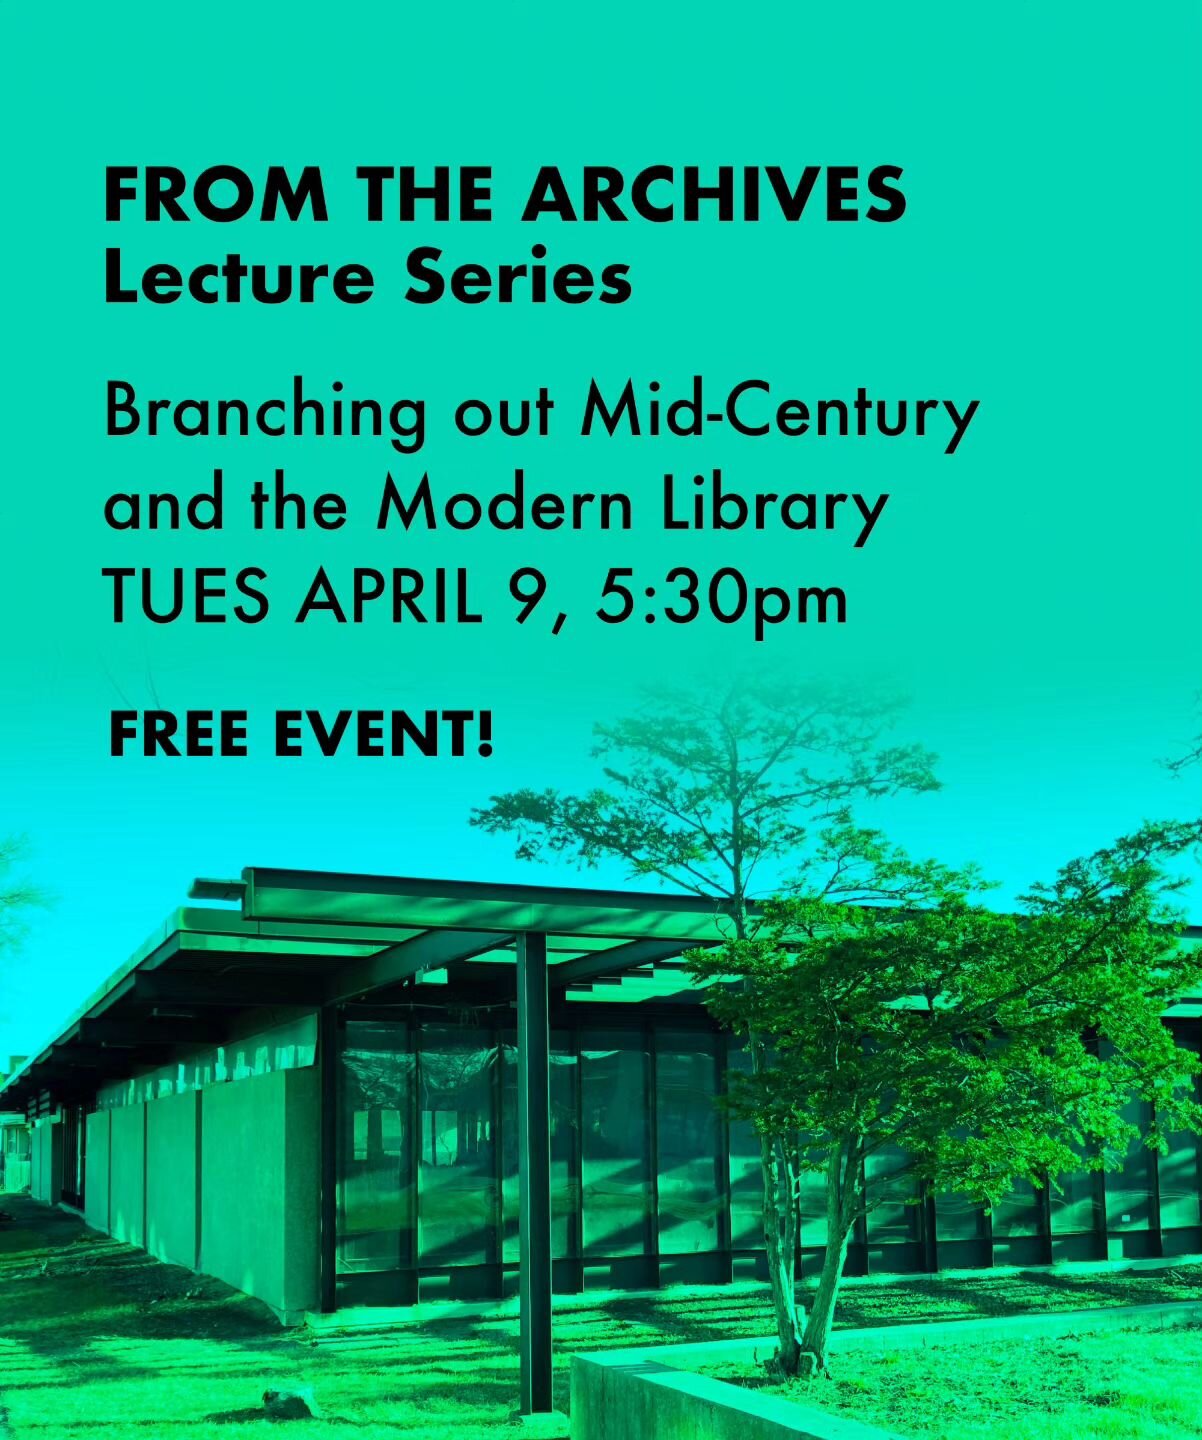 Your favorite lecture series is back! From The Archives presented by Docomomo Wisconsin. Join us at the Milwaukee Public Library in the Rare Books Room on the 2nd floor at 5:30pm to browse plans and archive materials from the addition and branches be